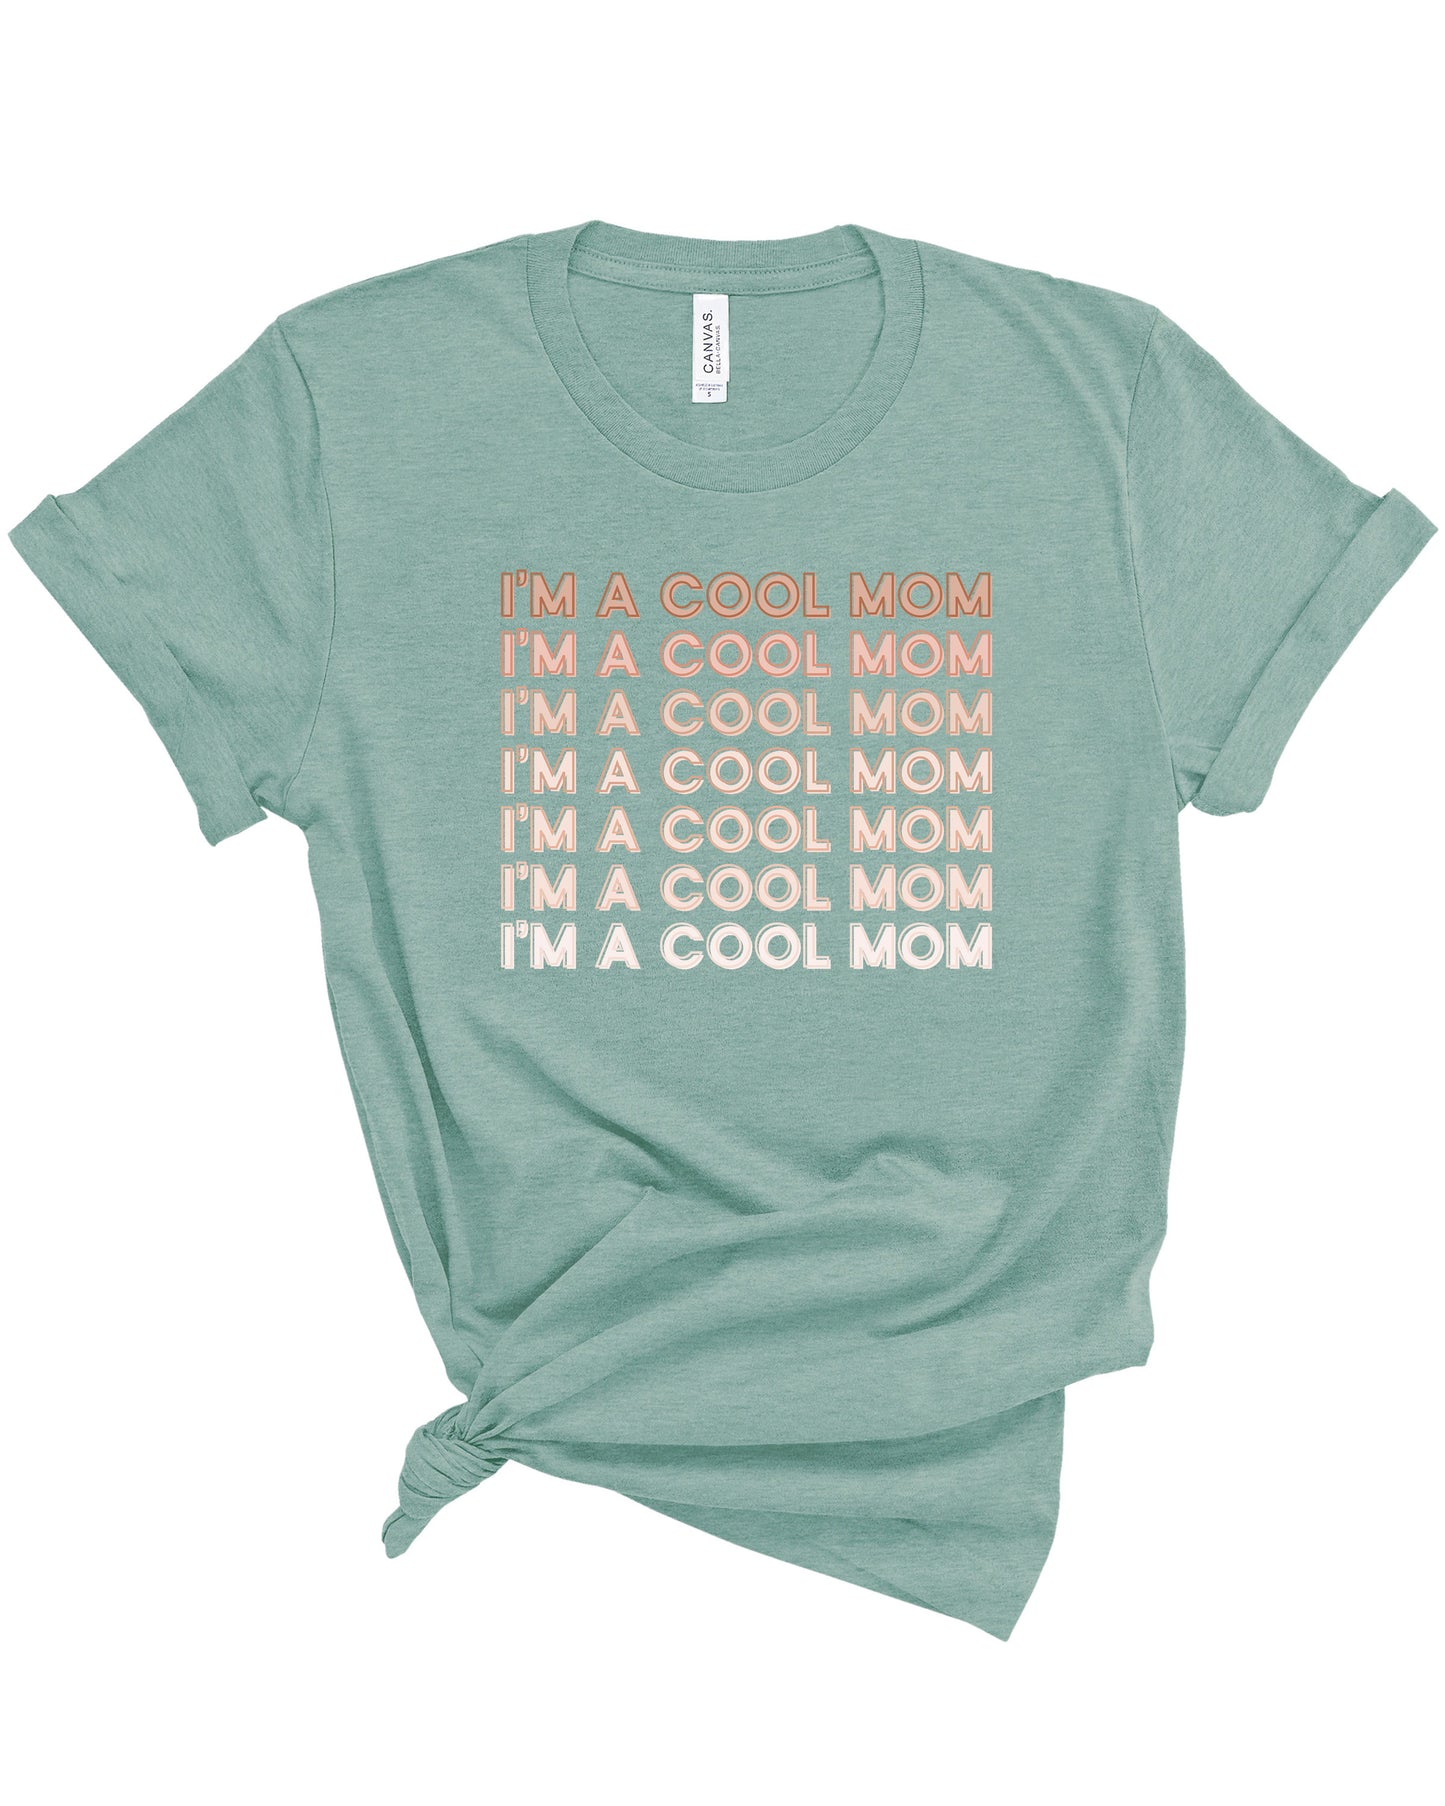 I'm A Cool Mom | Tee | Adult-Adult Tee-Sister Shirts-Sister Shirts, Cute & Custom Tees for Mama & Littles in Trussville, Alabama.